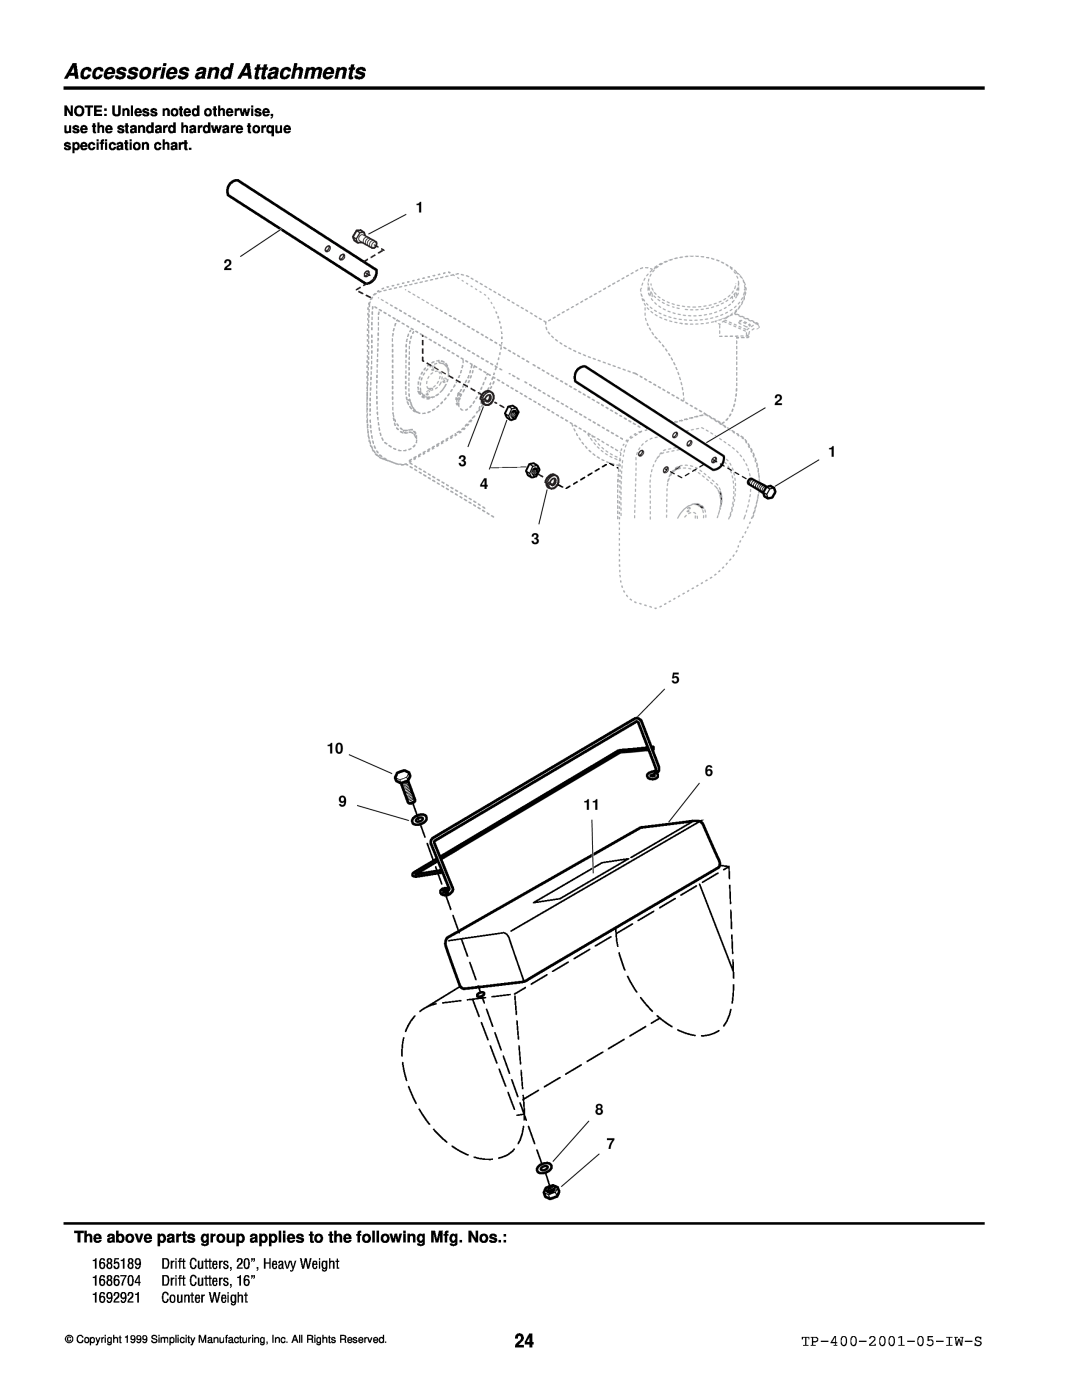 Simplicity 1692680 Accessories and Attachments, The above parts group applies to the following Mfg. Nos, Counter Weight 